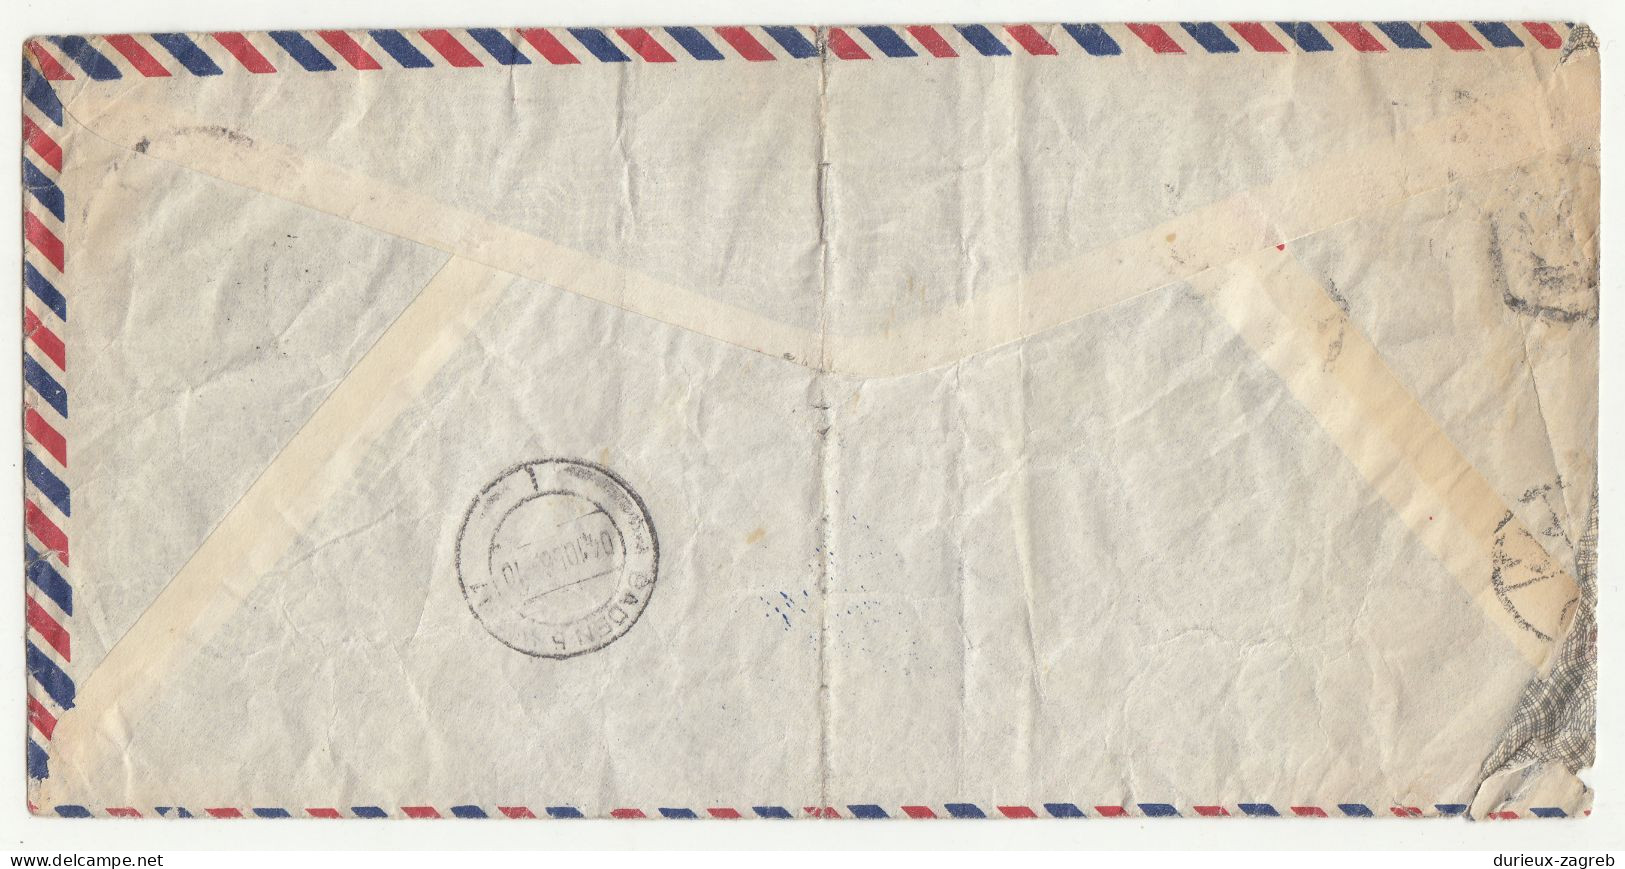 Jacot - Descombes & Co., Alexandria Company Letter Cover Posted 1956 To Austria B240510 - Lettres & Documents